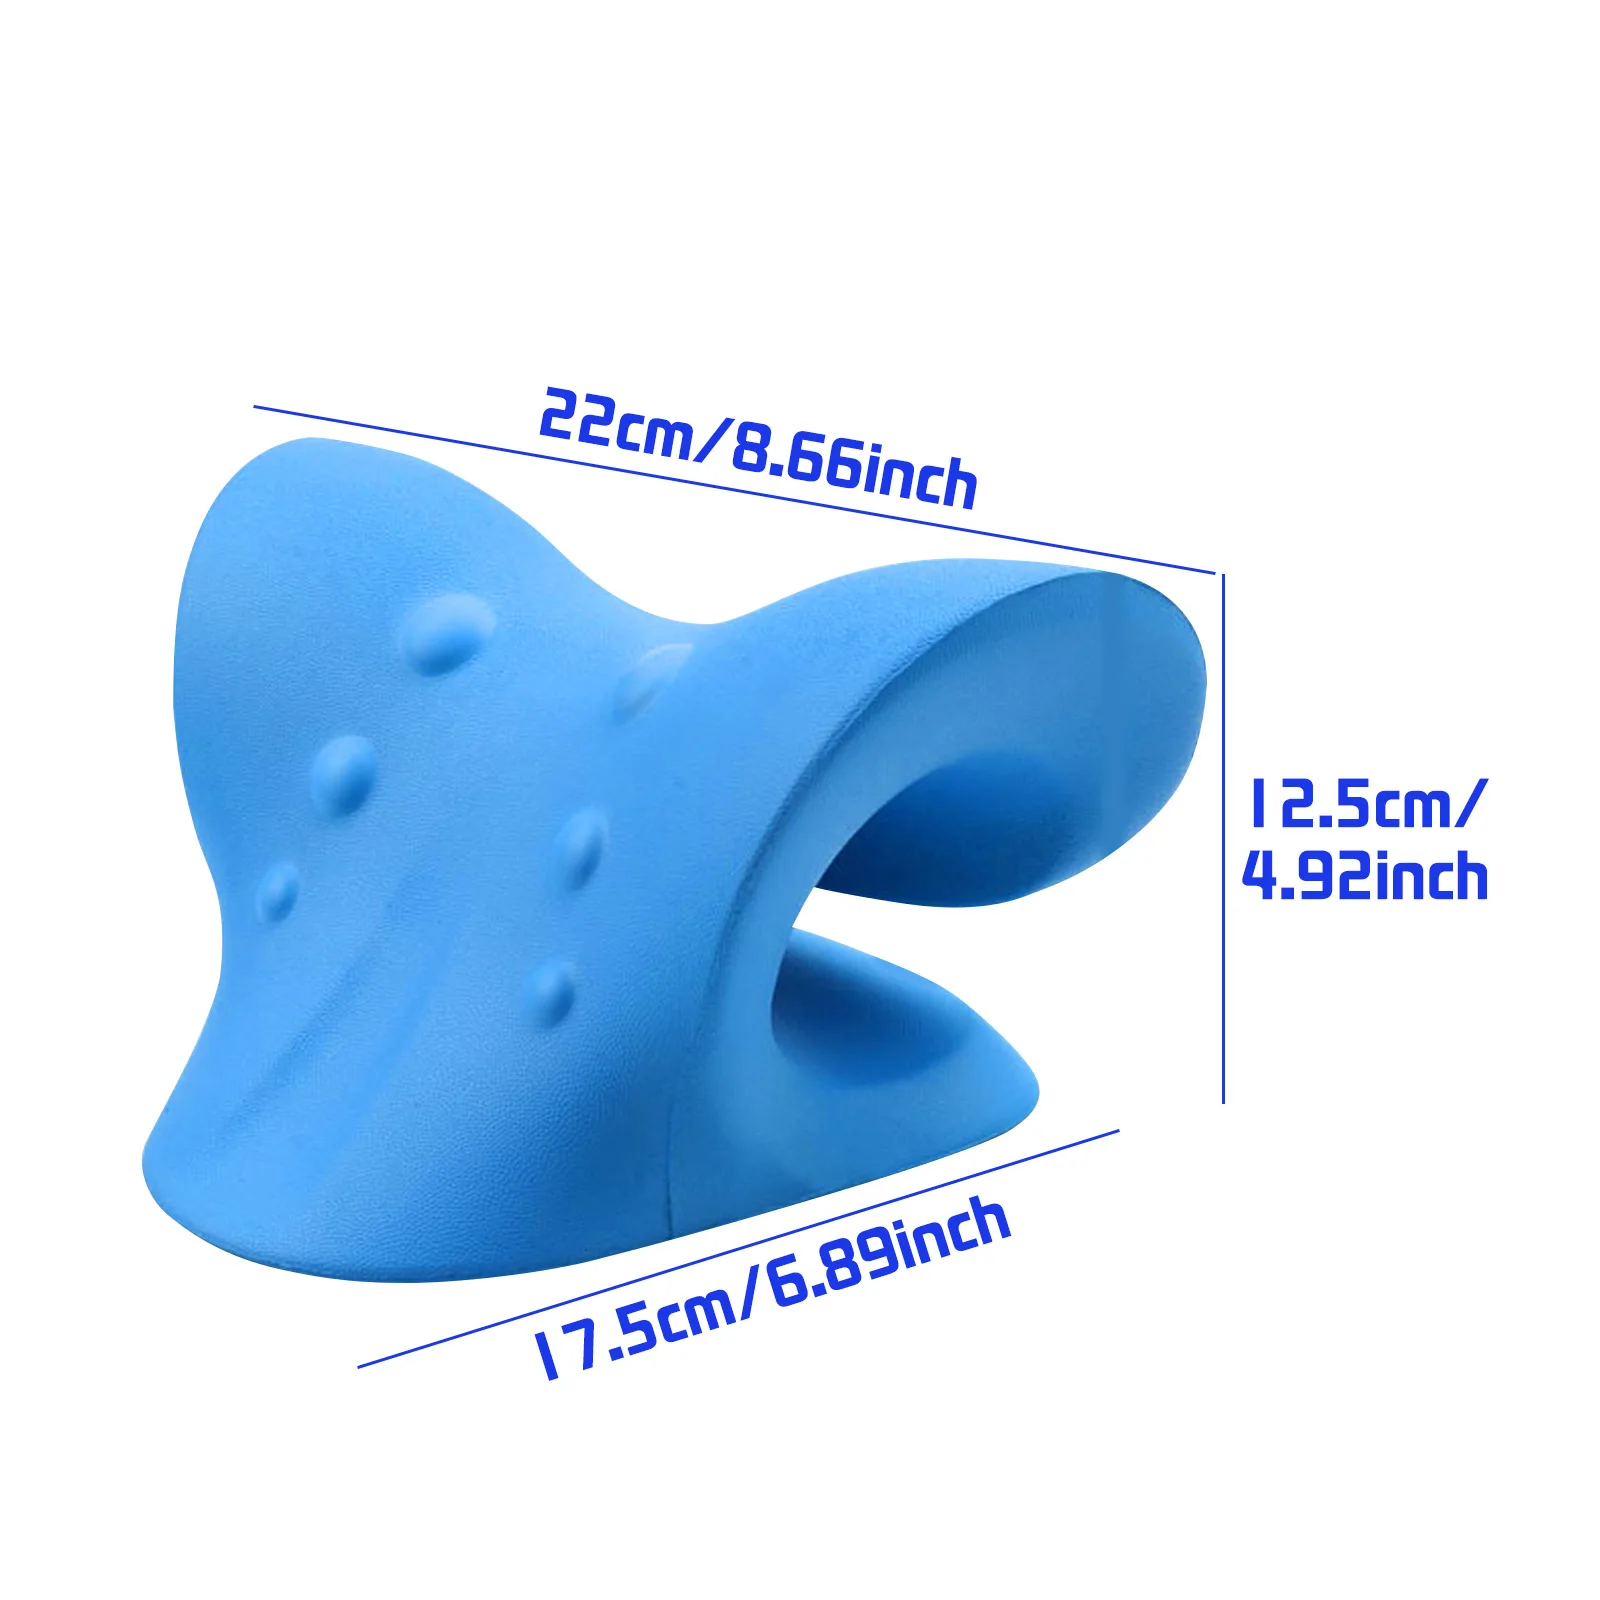 

Neck Shoulder Stretcher Relaxer Cervical Chiropractic Traction Device Massage Pillow for Pain Relief Cervical Spine Alignment